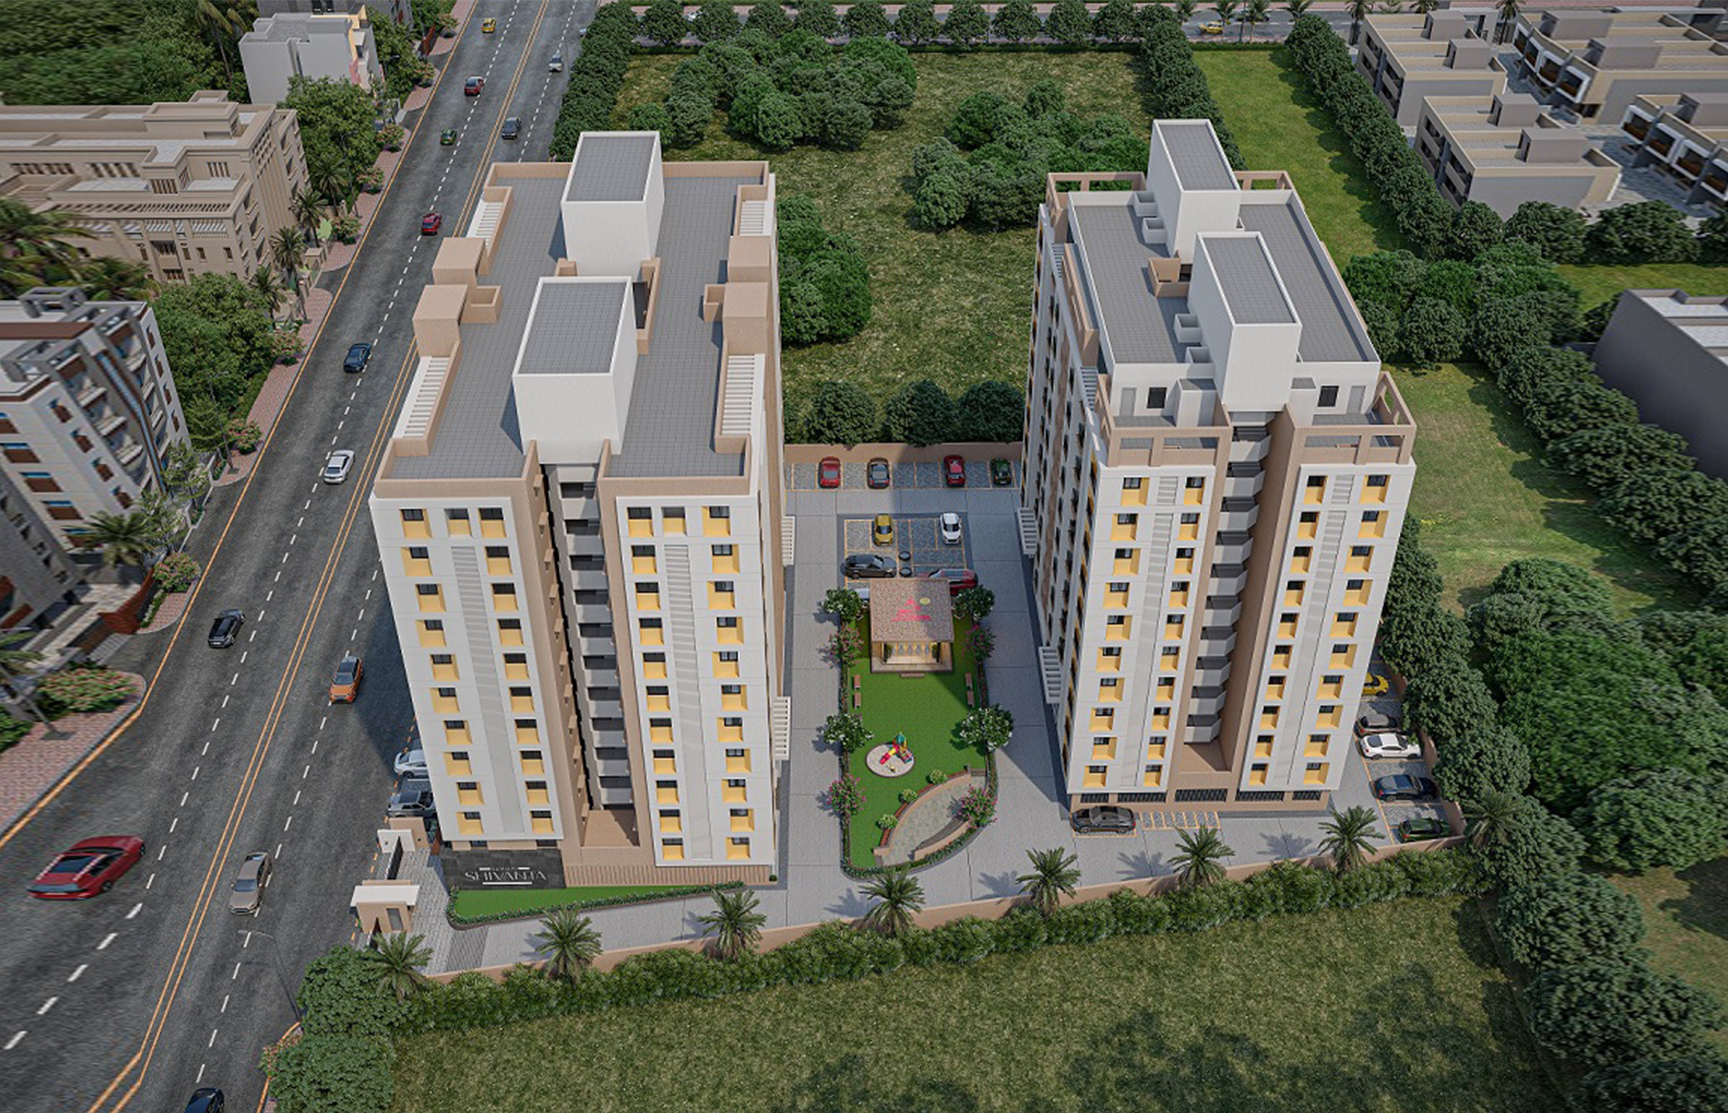 3 BHK Residential Flats in surat